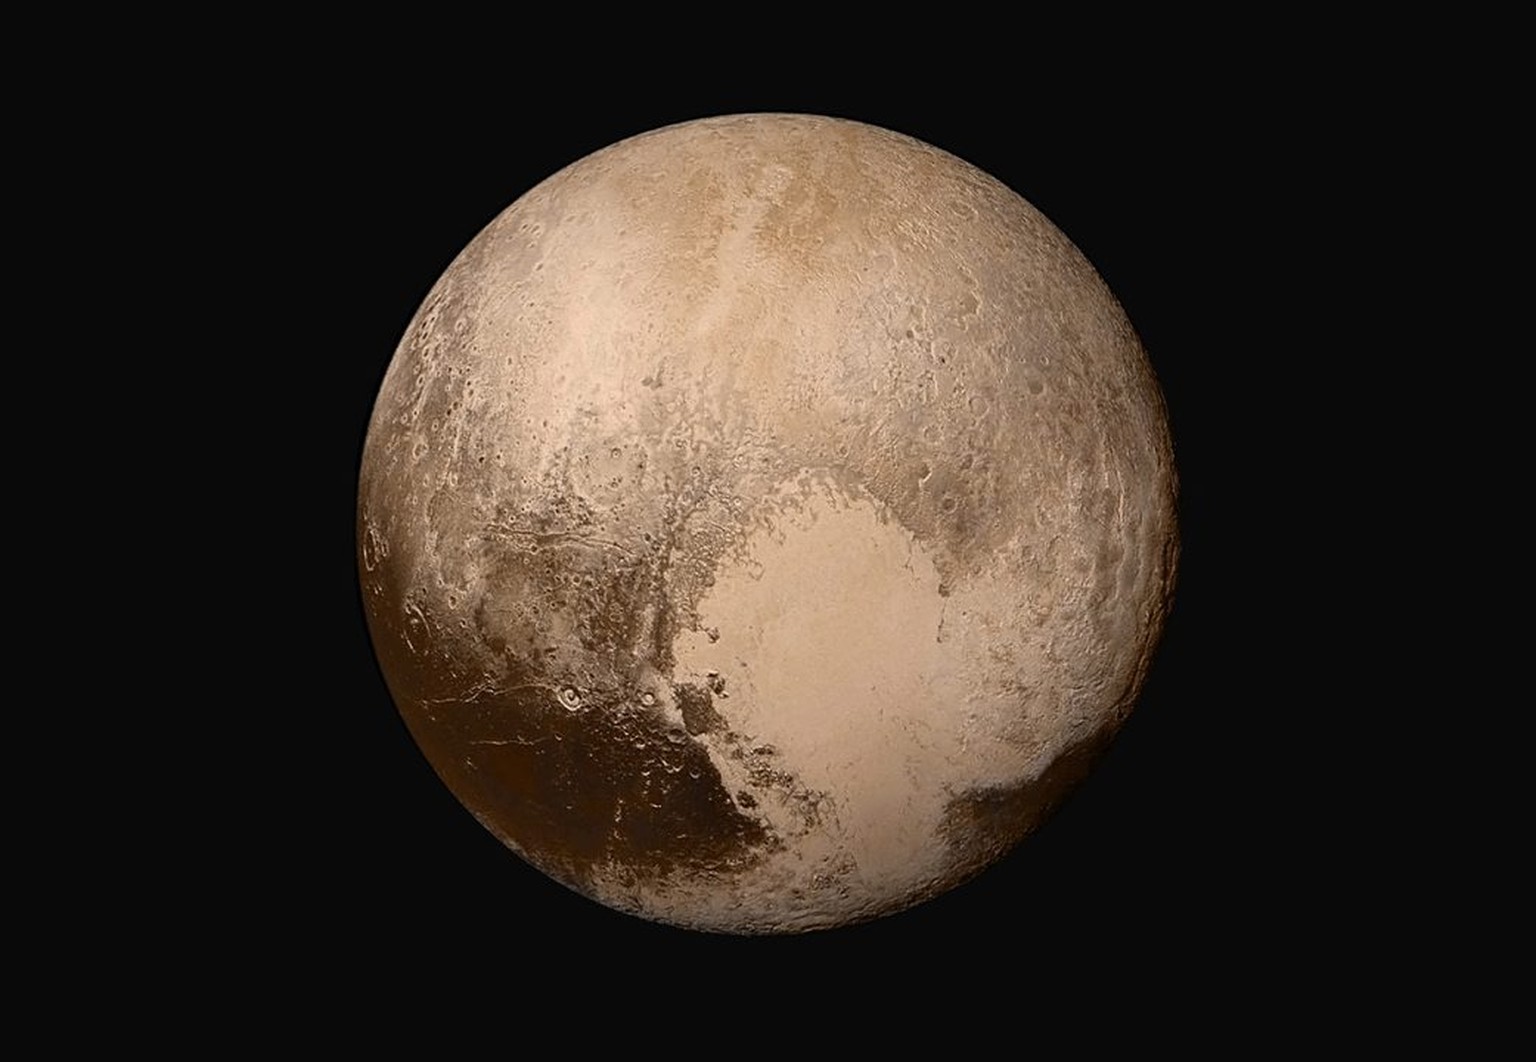 epa04859033 A handout image provided by NASA on 24 July 2015 shows the dwarf planet Pluto. Four images from New Horizons’ Long Range Reconnaissance Imager (LORRI) were combined with color data from th ...